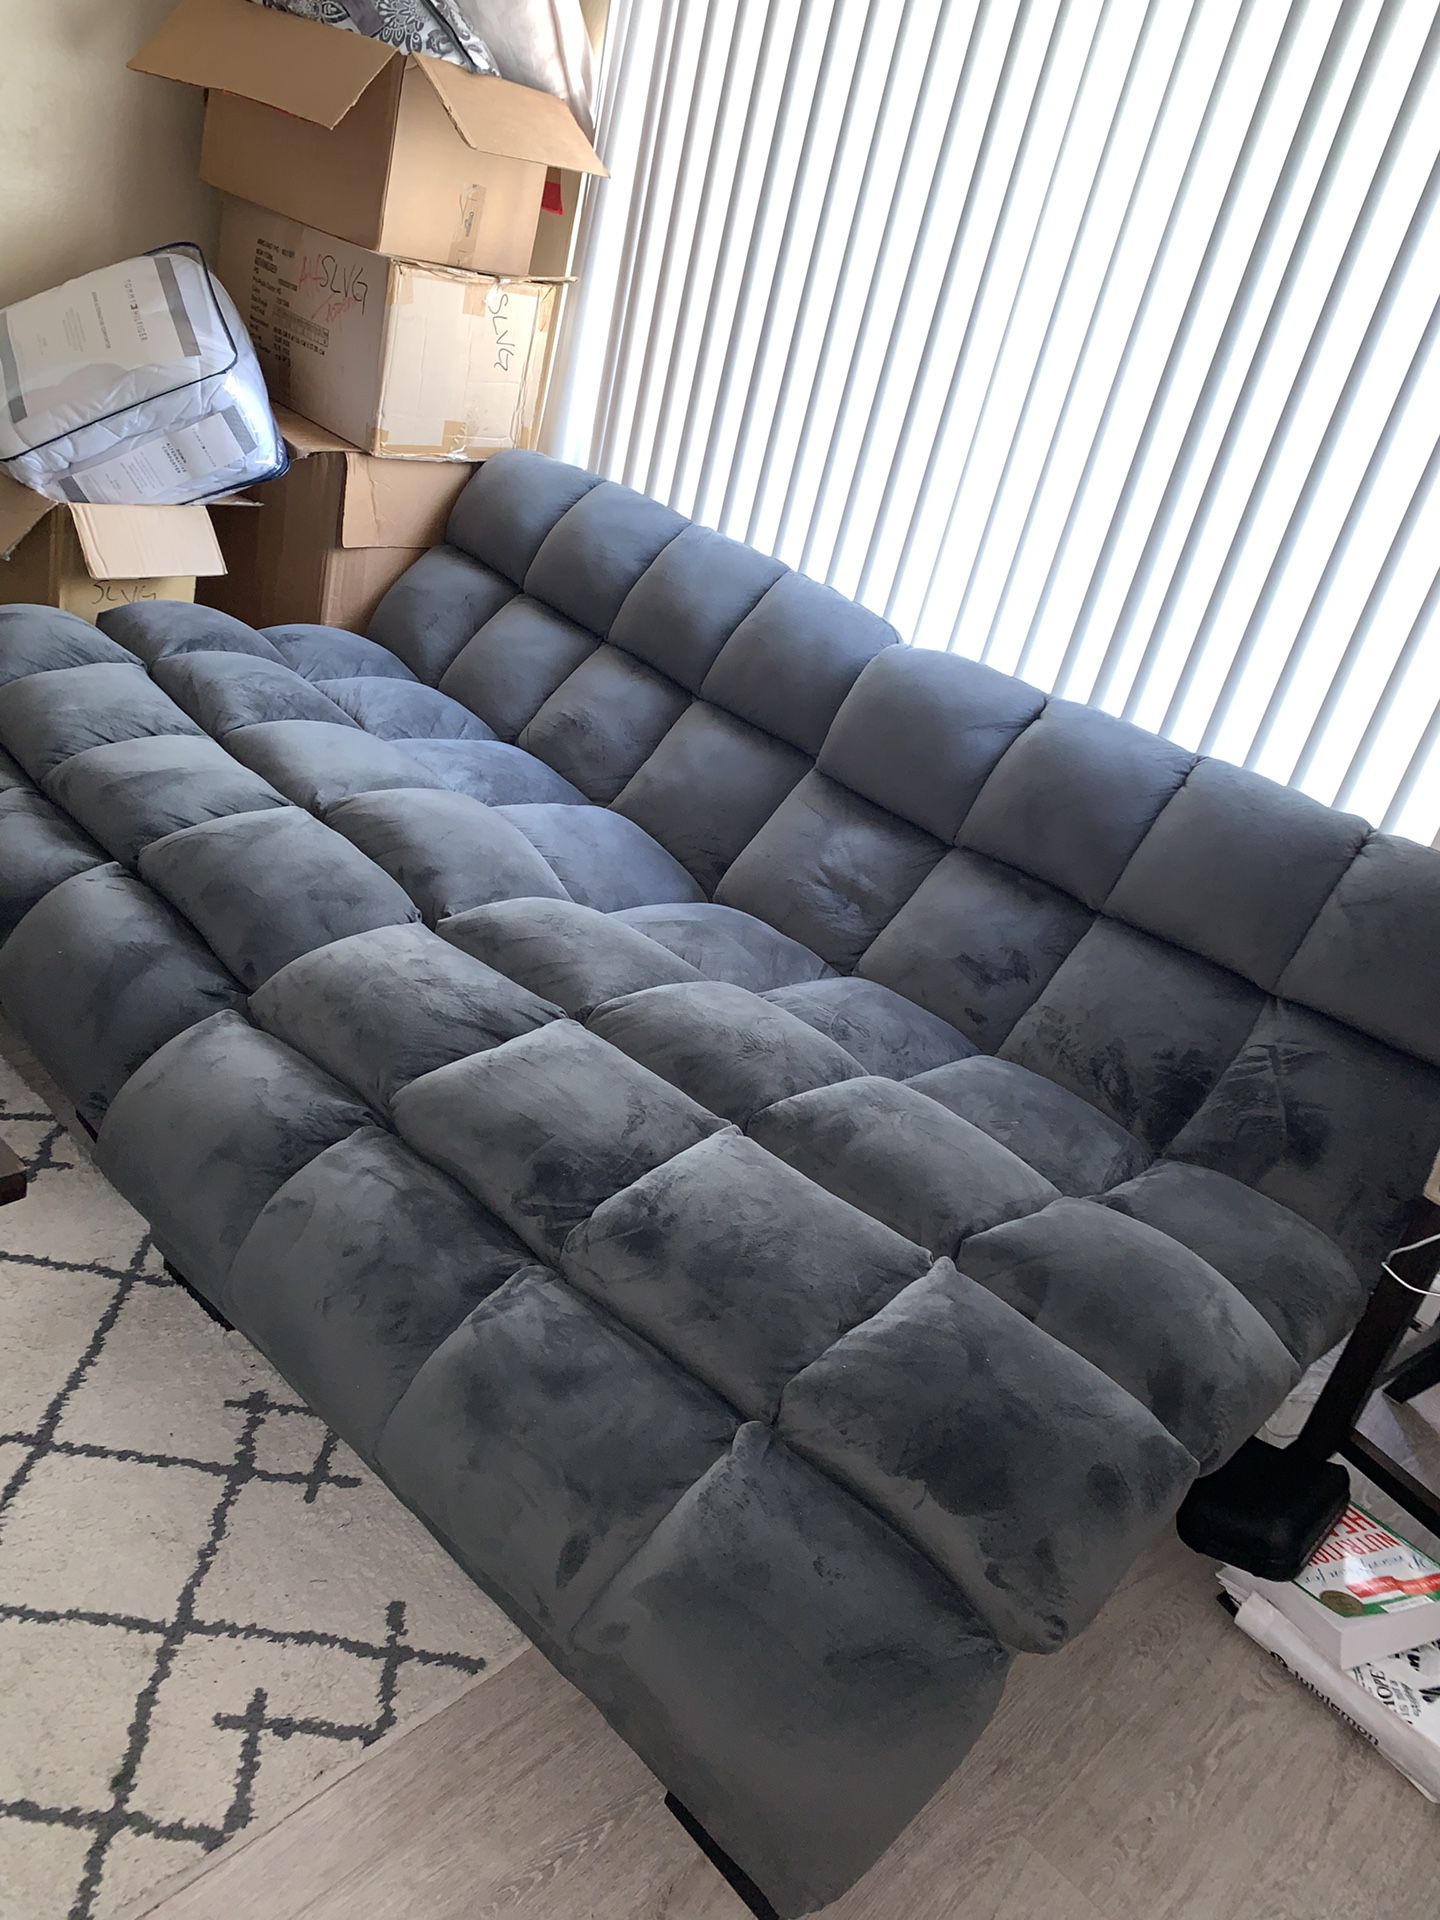 2 suede couch chairs